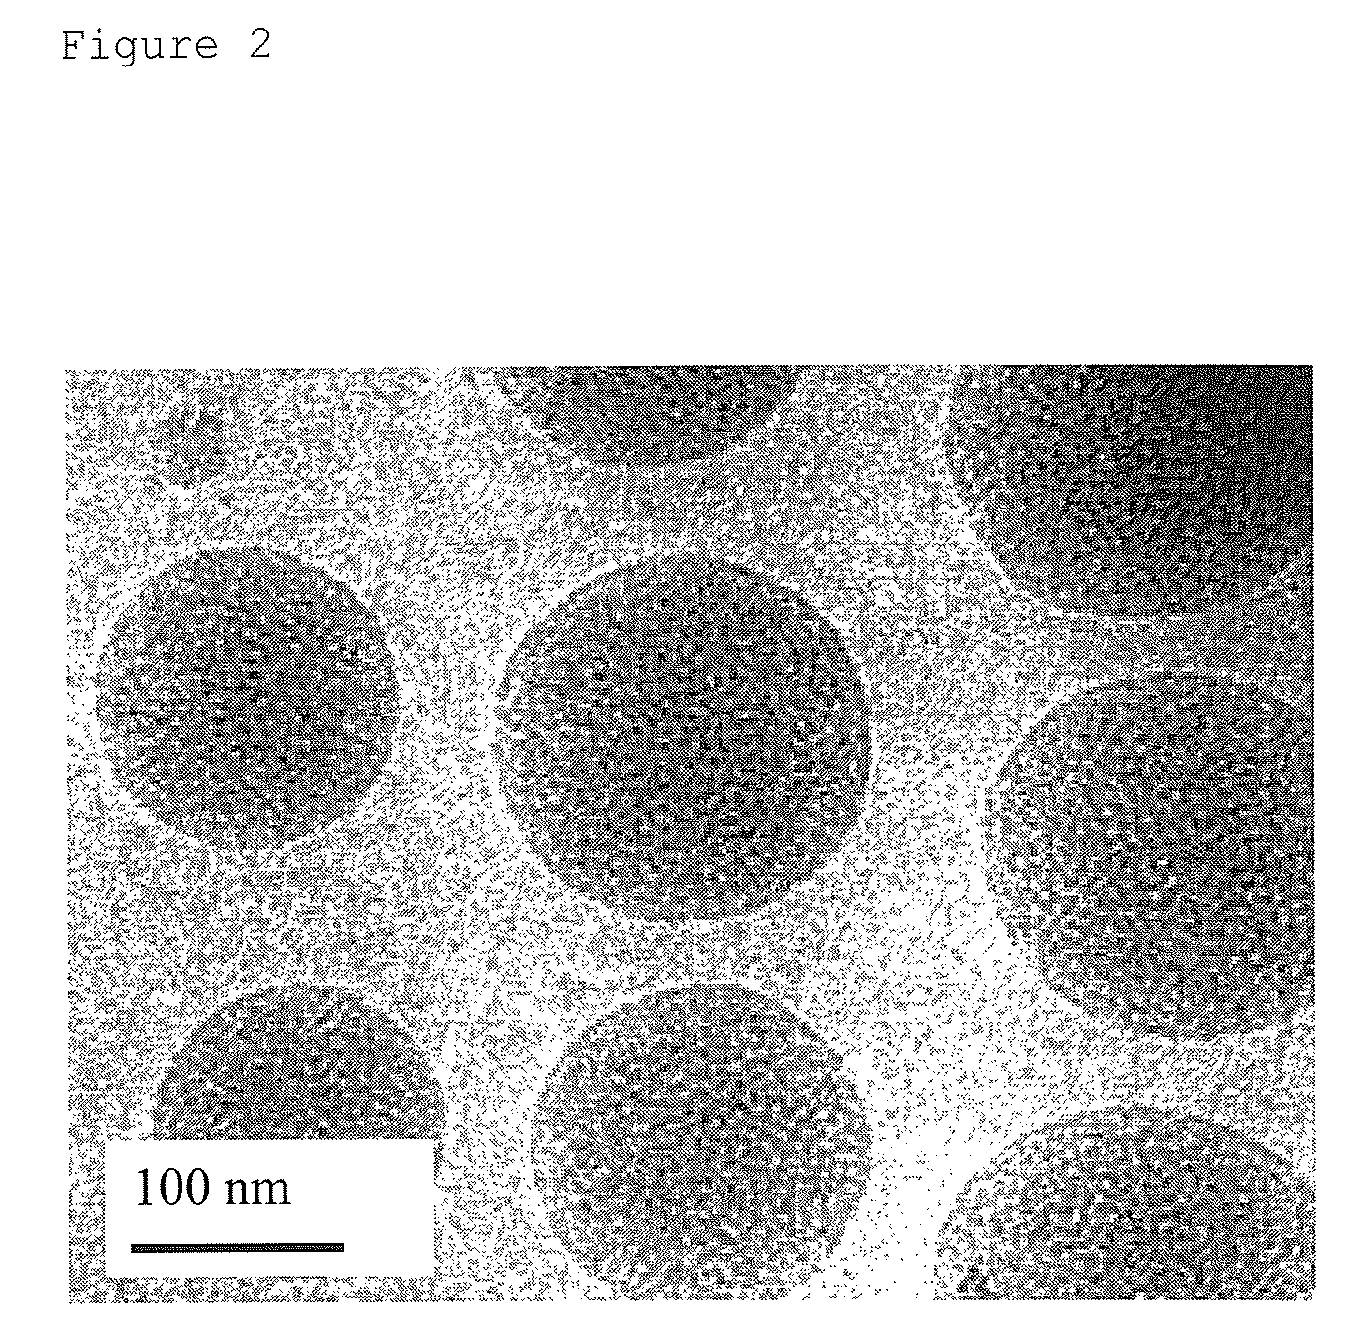 Oil-in-water emulsion and its use for the delivery of functionality